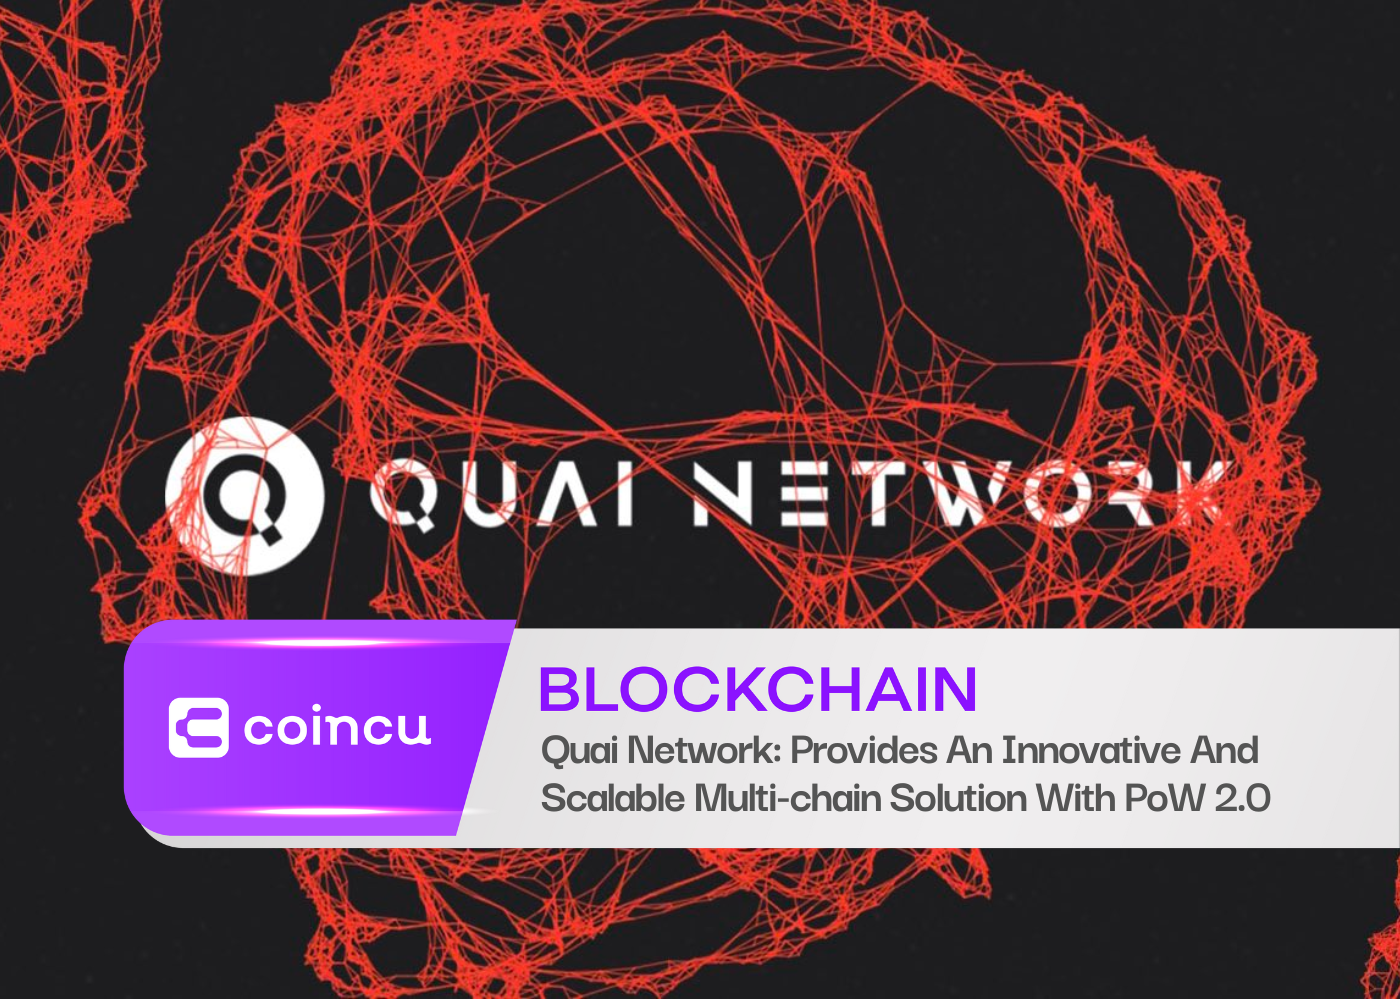 Quai Network: Provides An Innovative And Scalable Multi-chain Solution With PoW 2.0